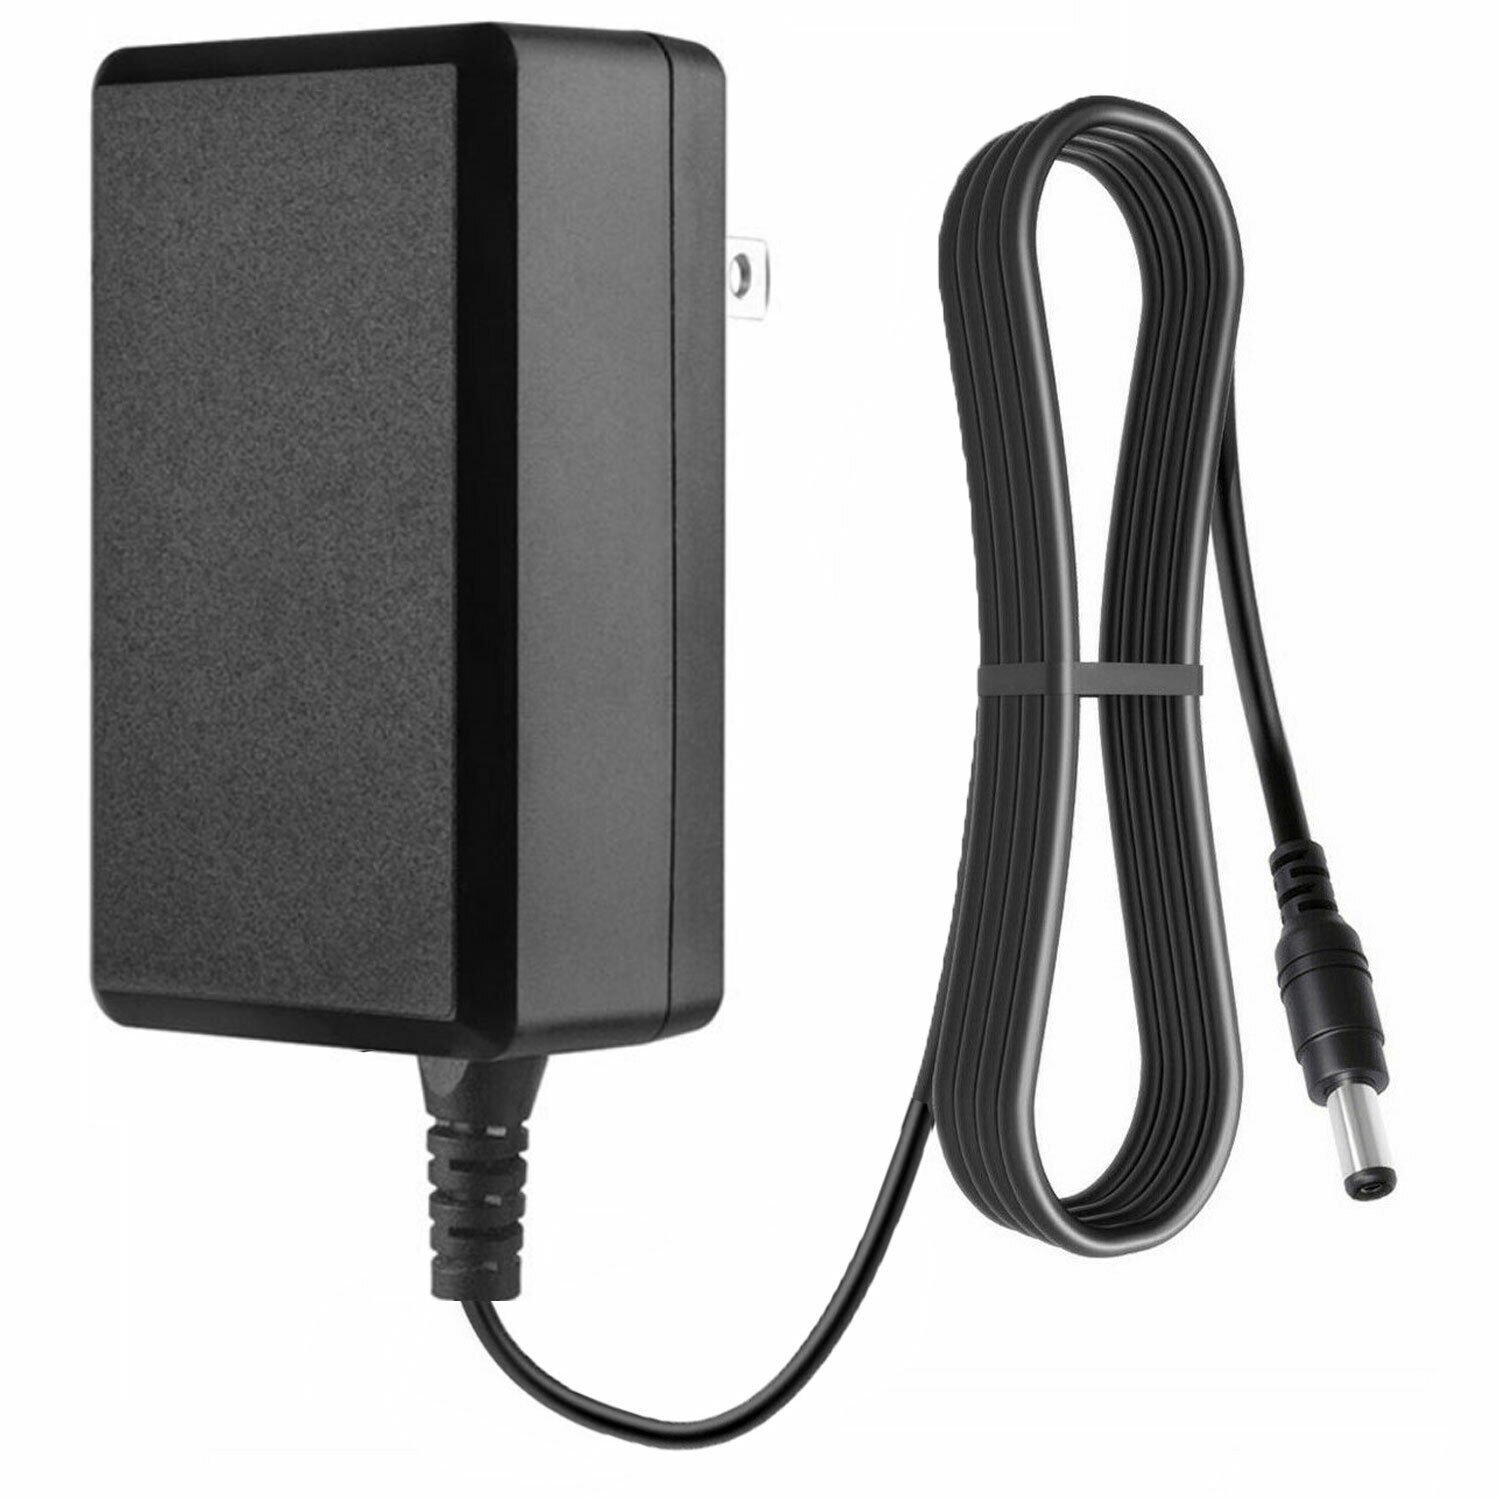 AC Adapter for Deerma VC20 VC21 VC20 Plus Cordless Vacuum Cleaner Power Charger Type: AC/AC Adapter Brand: Deerma MP